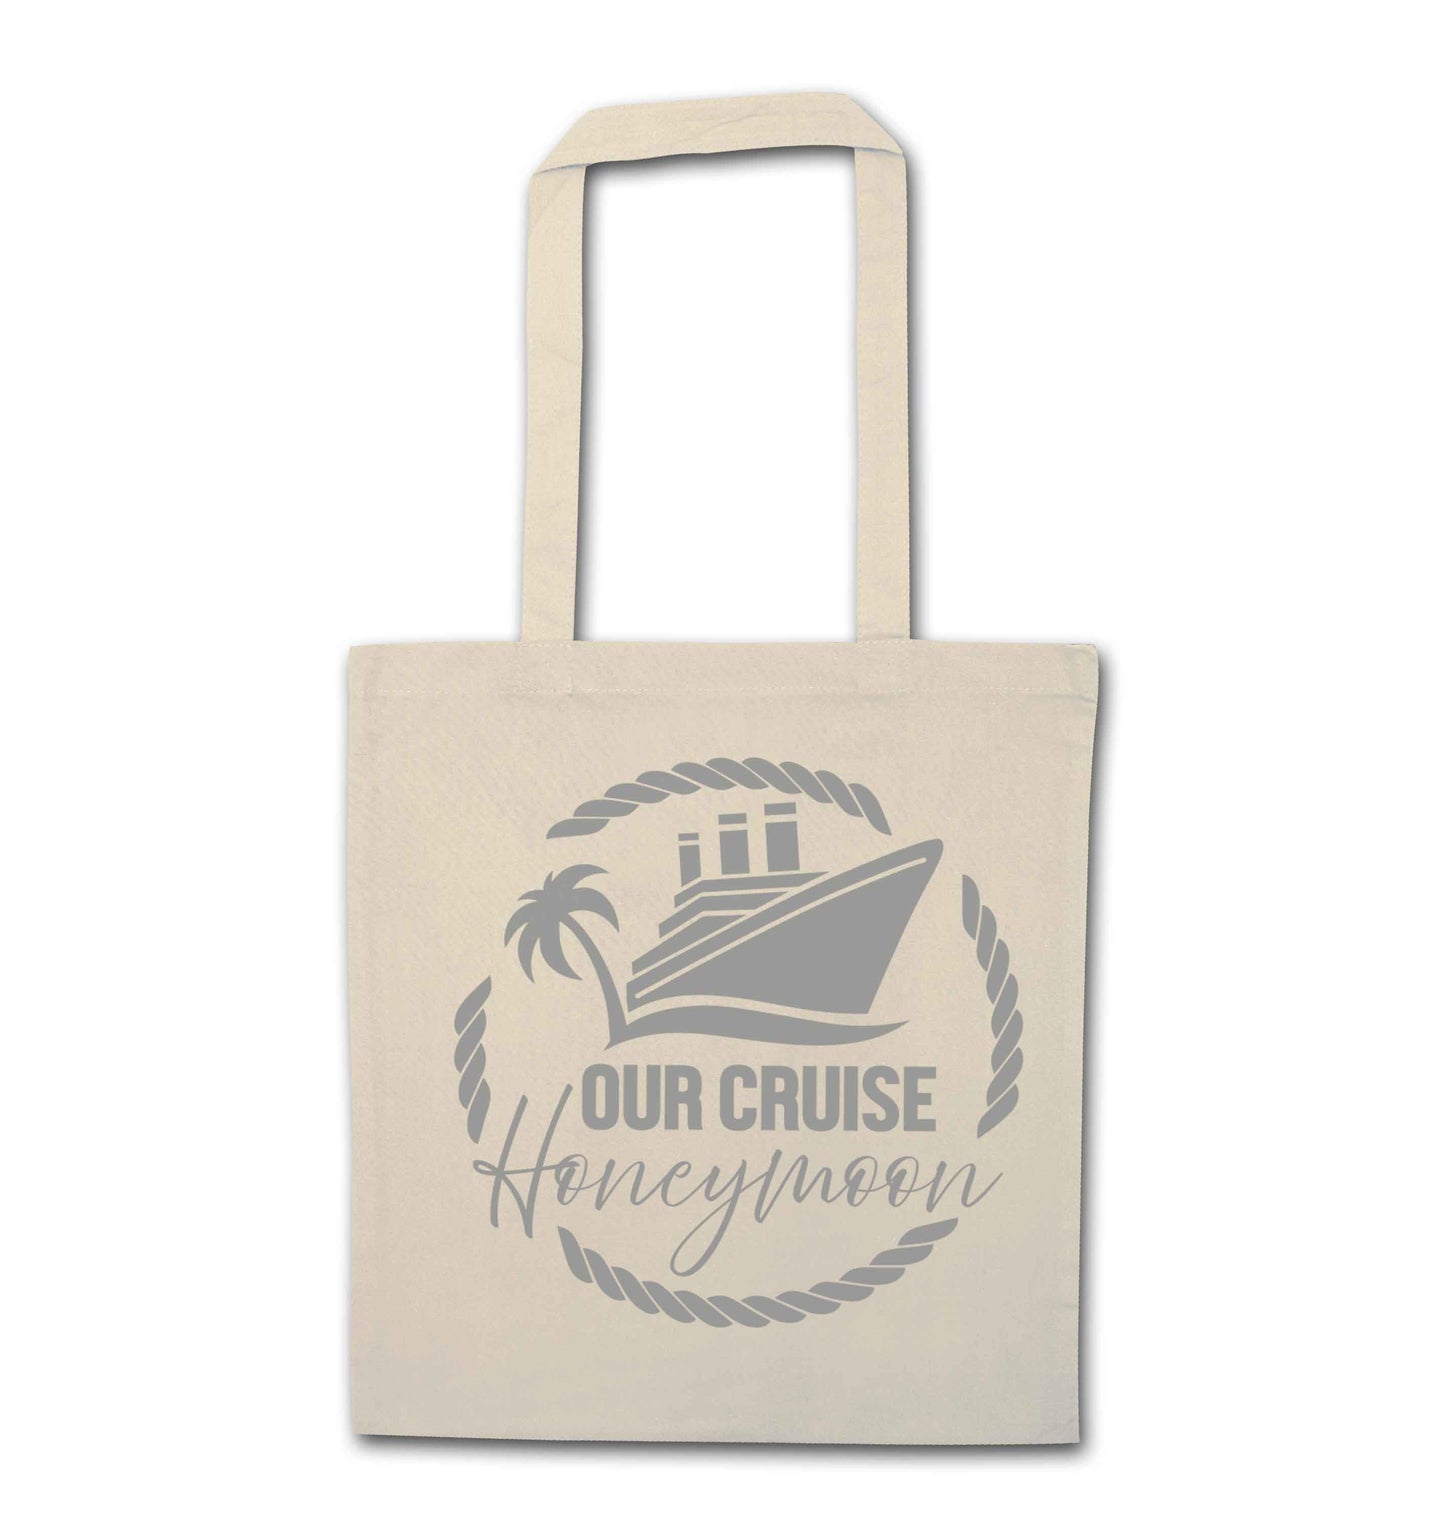 Our cruise honeymoon natural tote bag